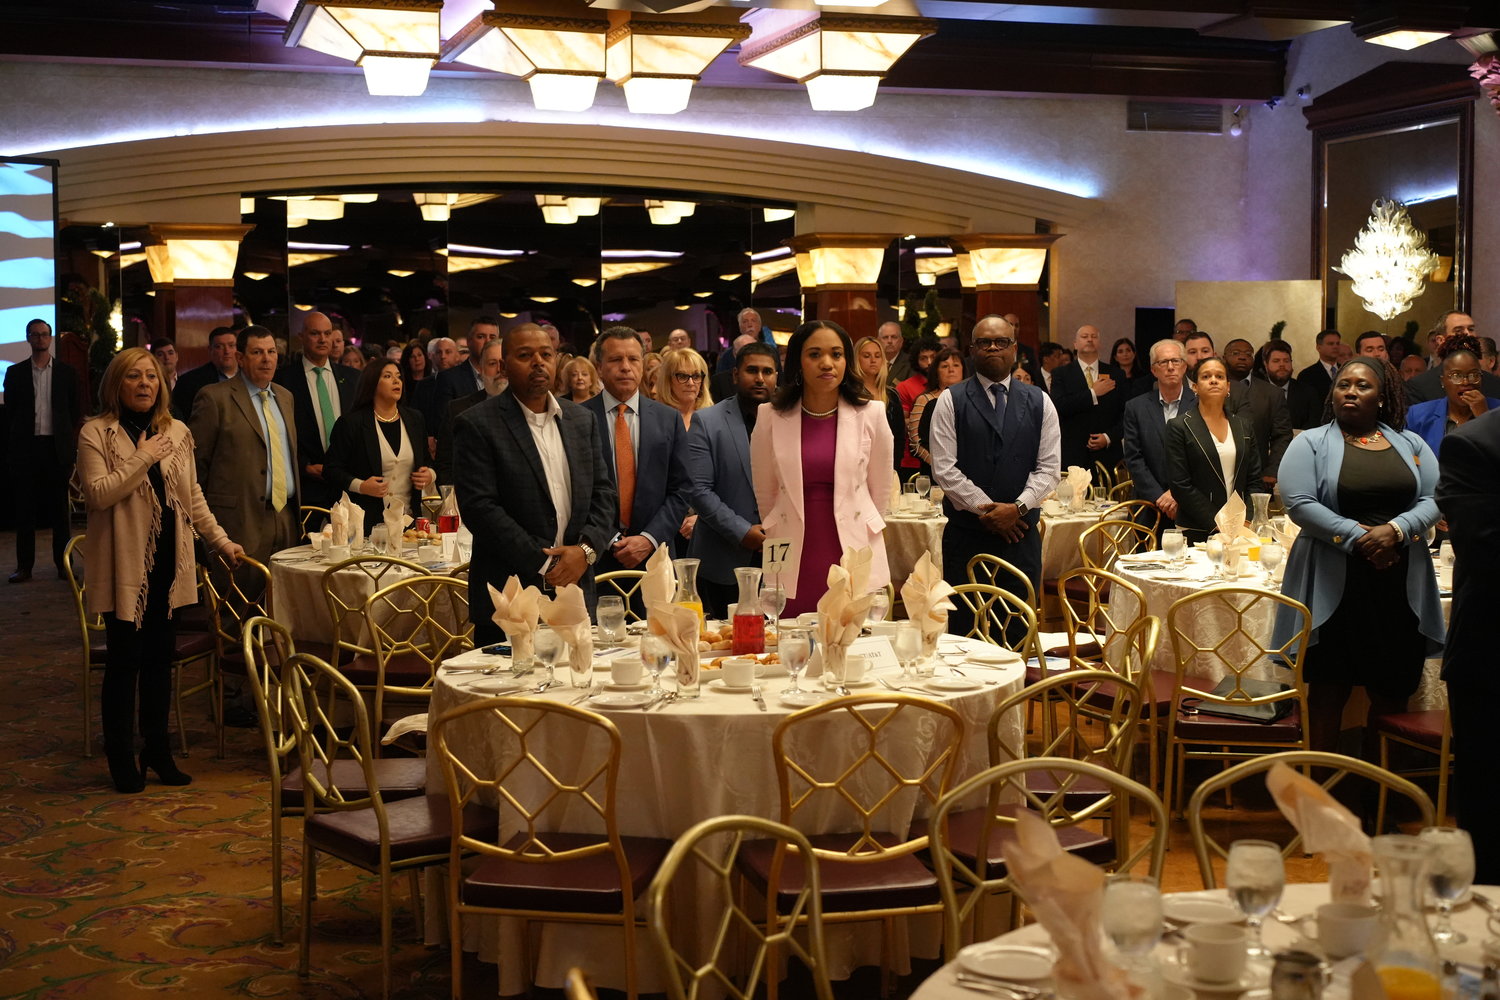 Hundreds gathered at Crest Hollow Country Club in Woodbury Oct. 28 to honor the Nassau Council of Chambers of Commerce Businesspersons of the Year.